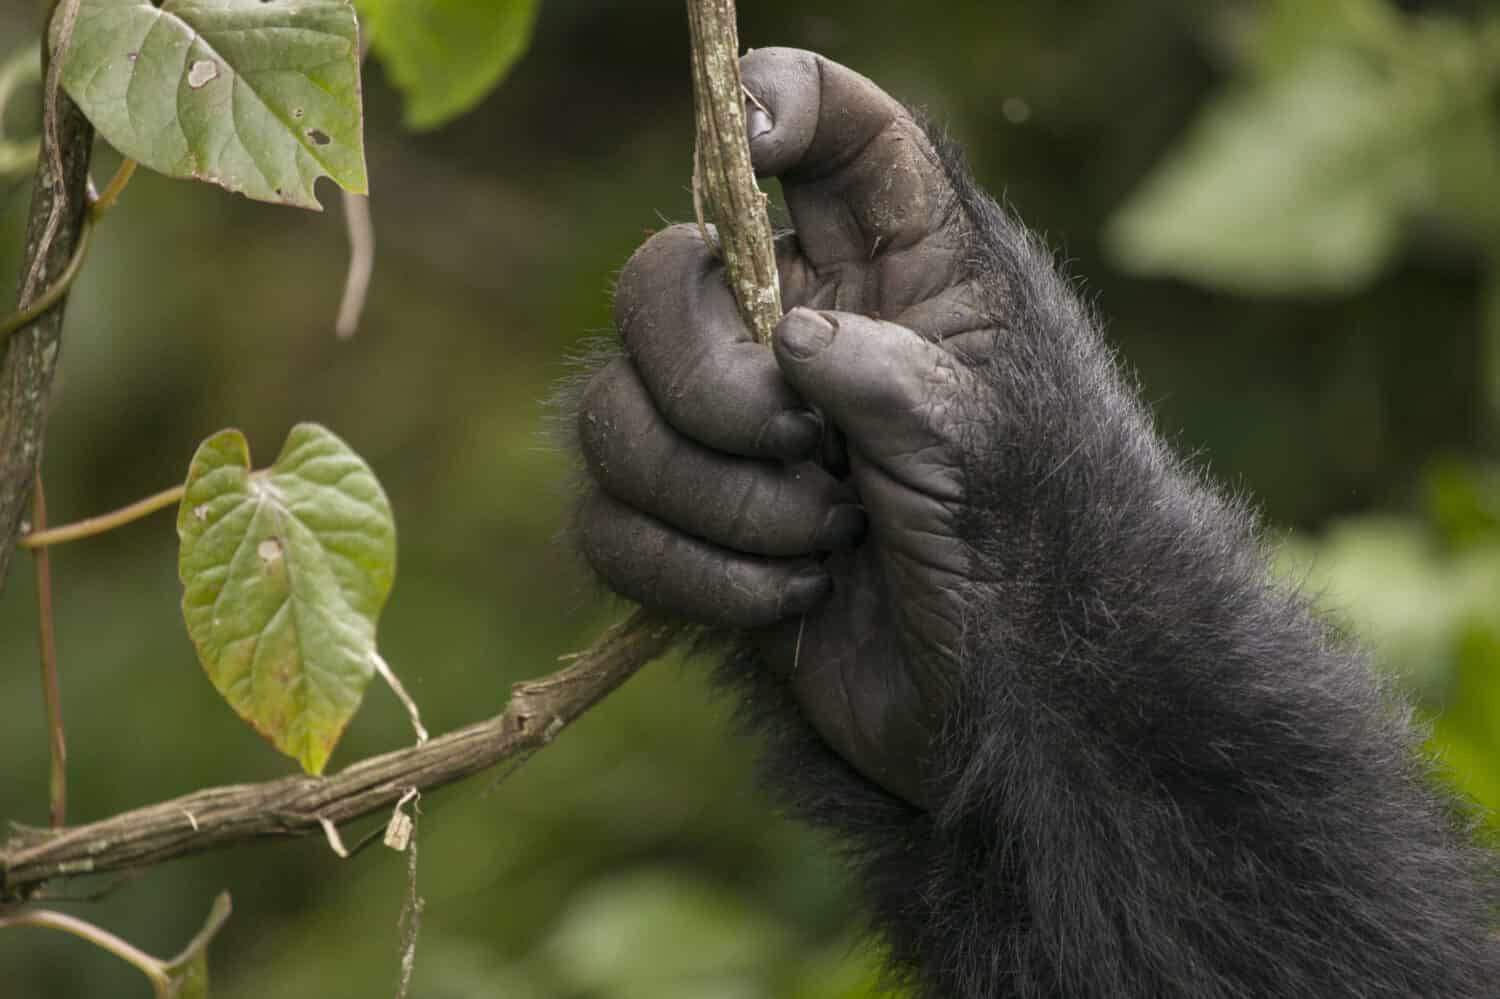 The hand of a Mountain gorilla in the jungles of Rwanda, Africa, holding a vine